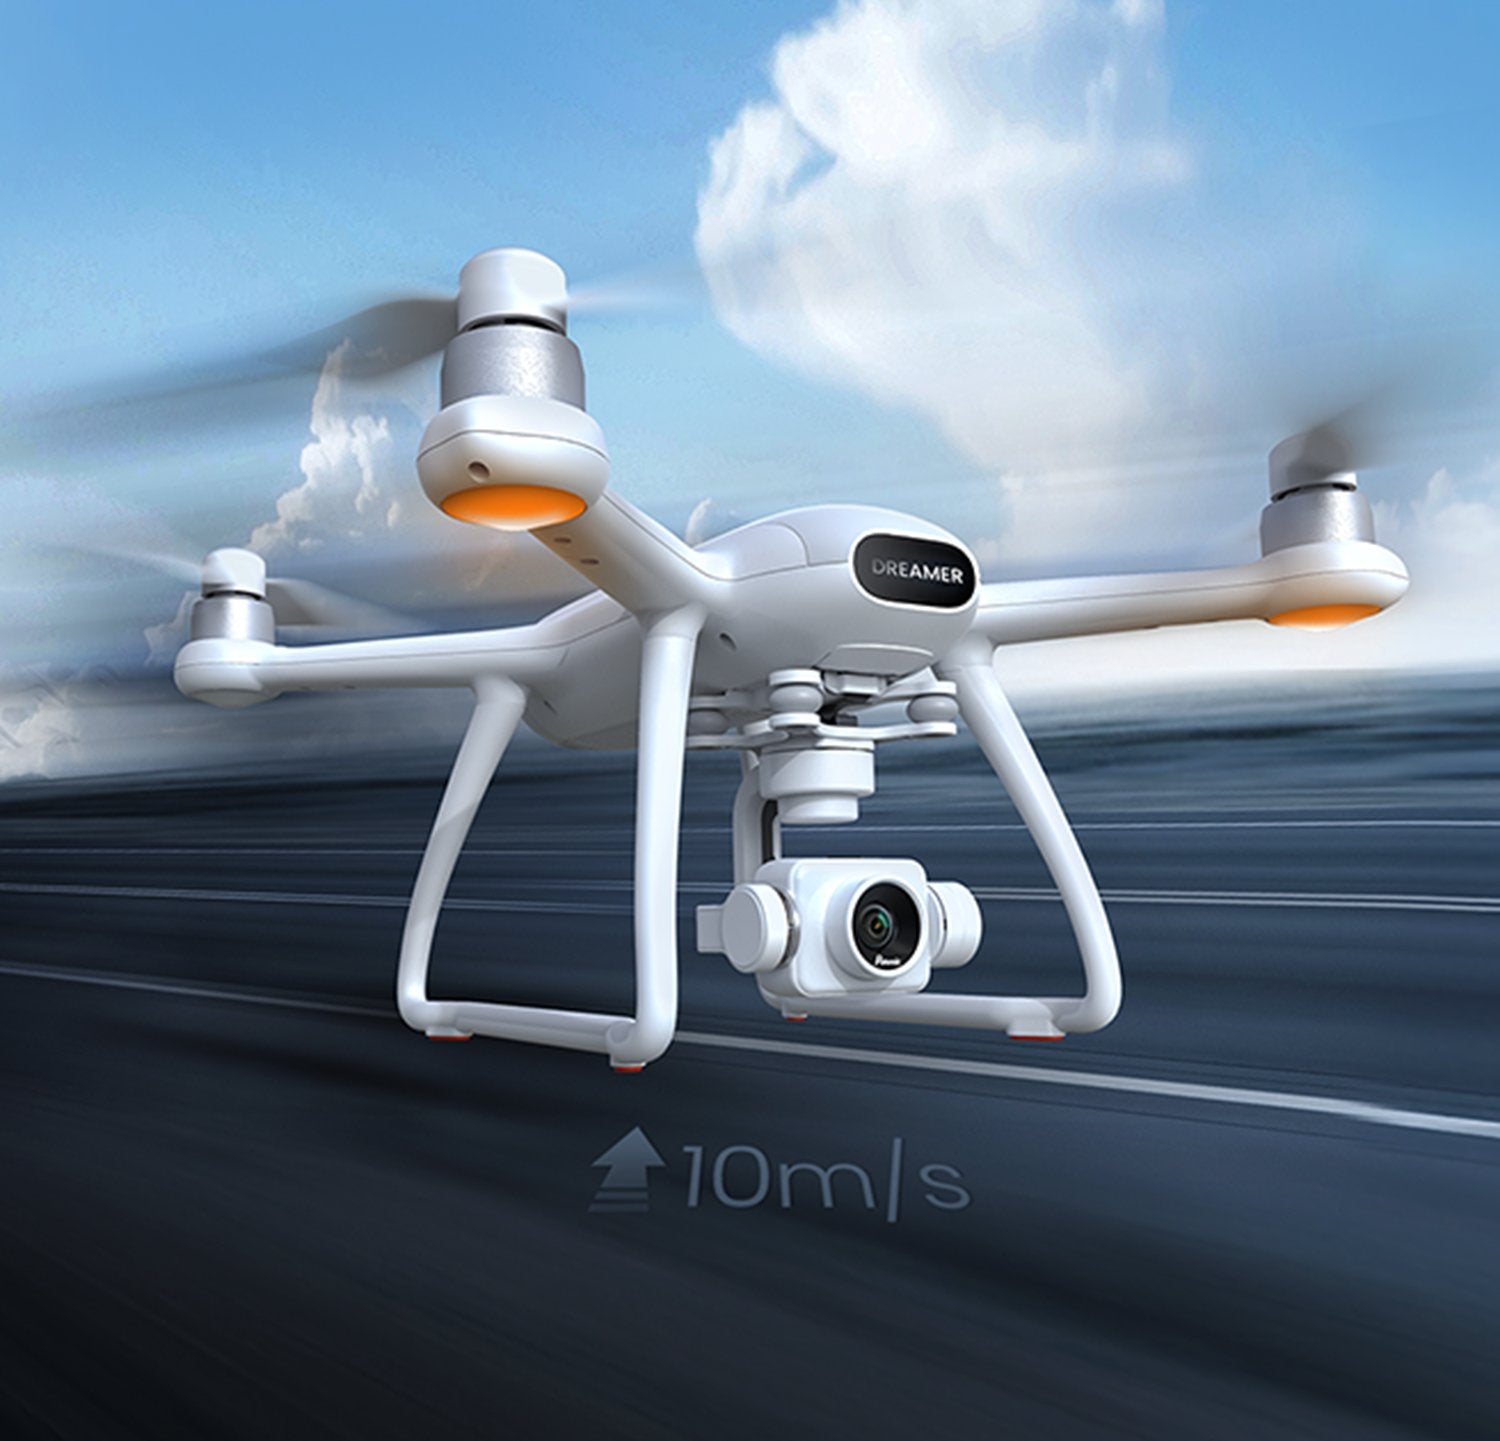 Potensic's 4K drone captures 4K30 with a 3-axis gimbal and over 1-mile  range at low of $300